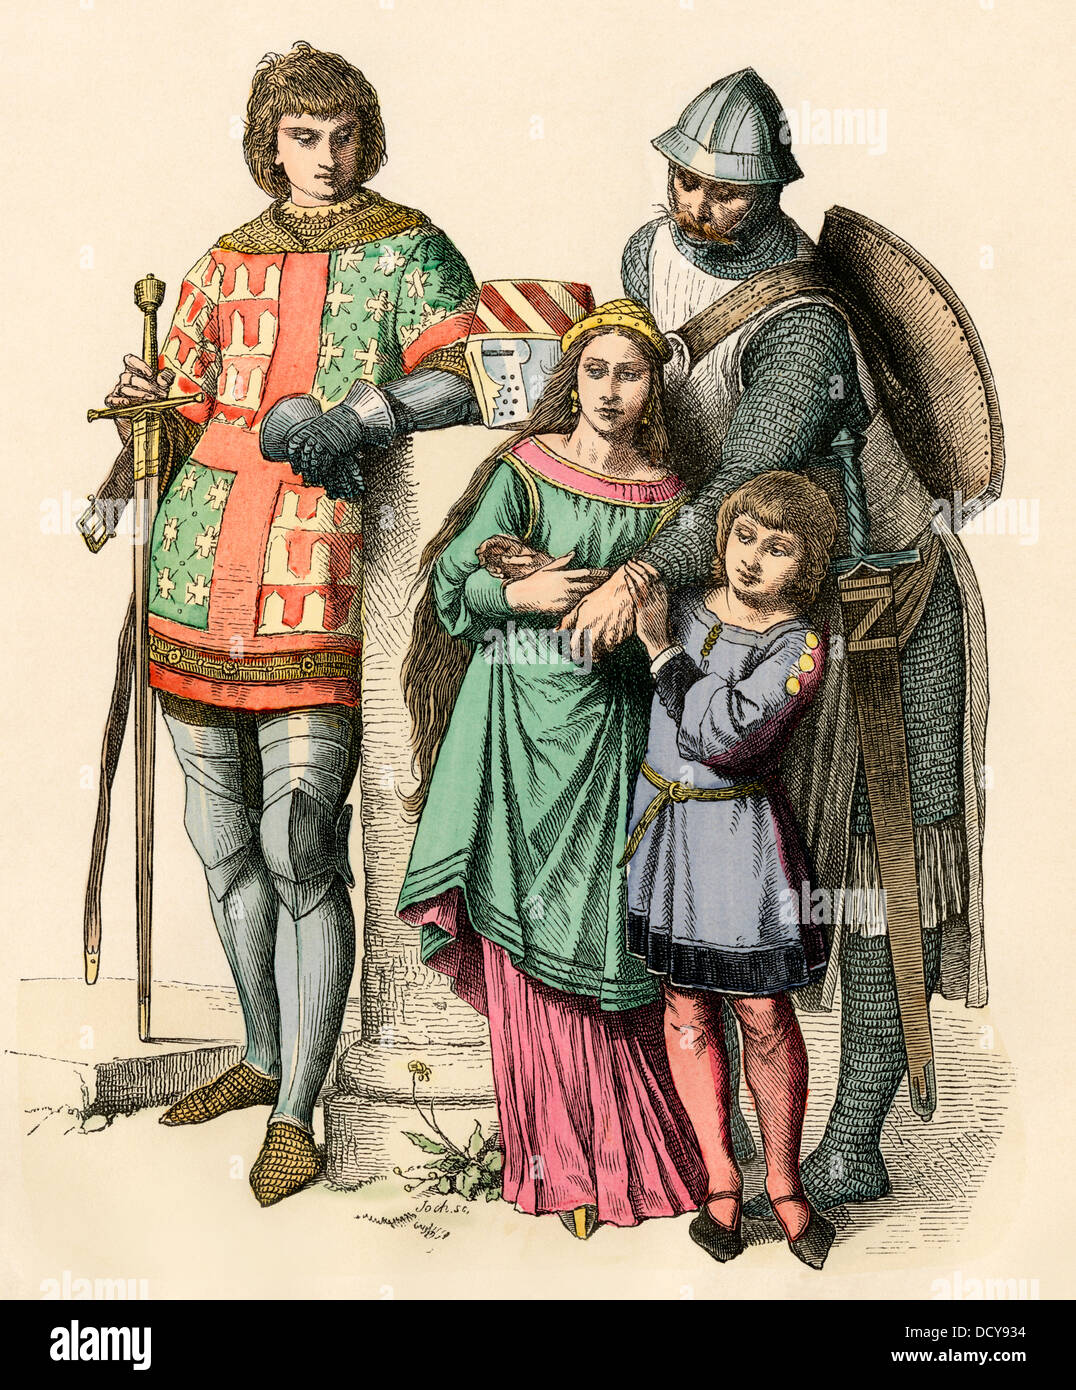 German Medieval Dresses In The 14th | peacecommission.kdsg.gov.ng